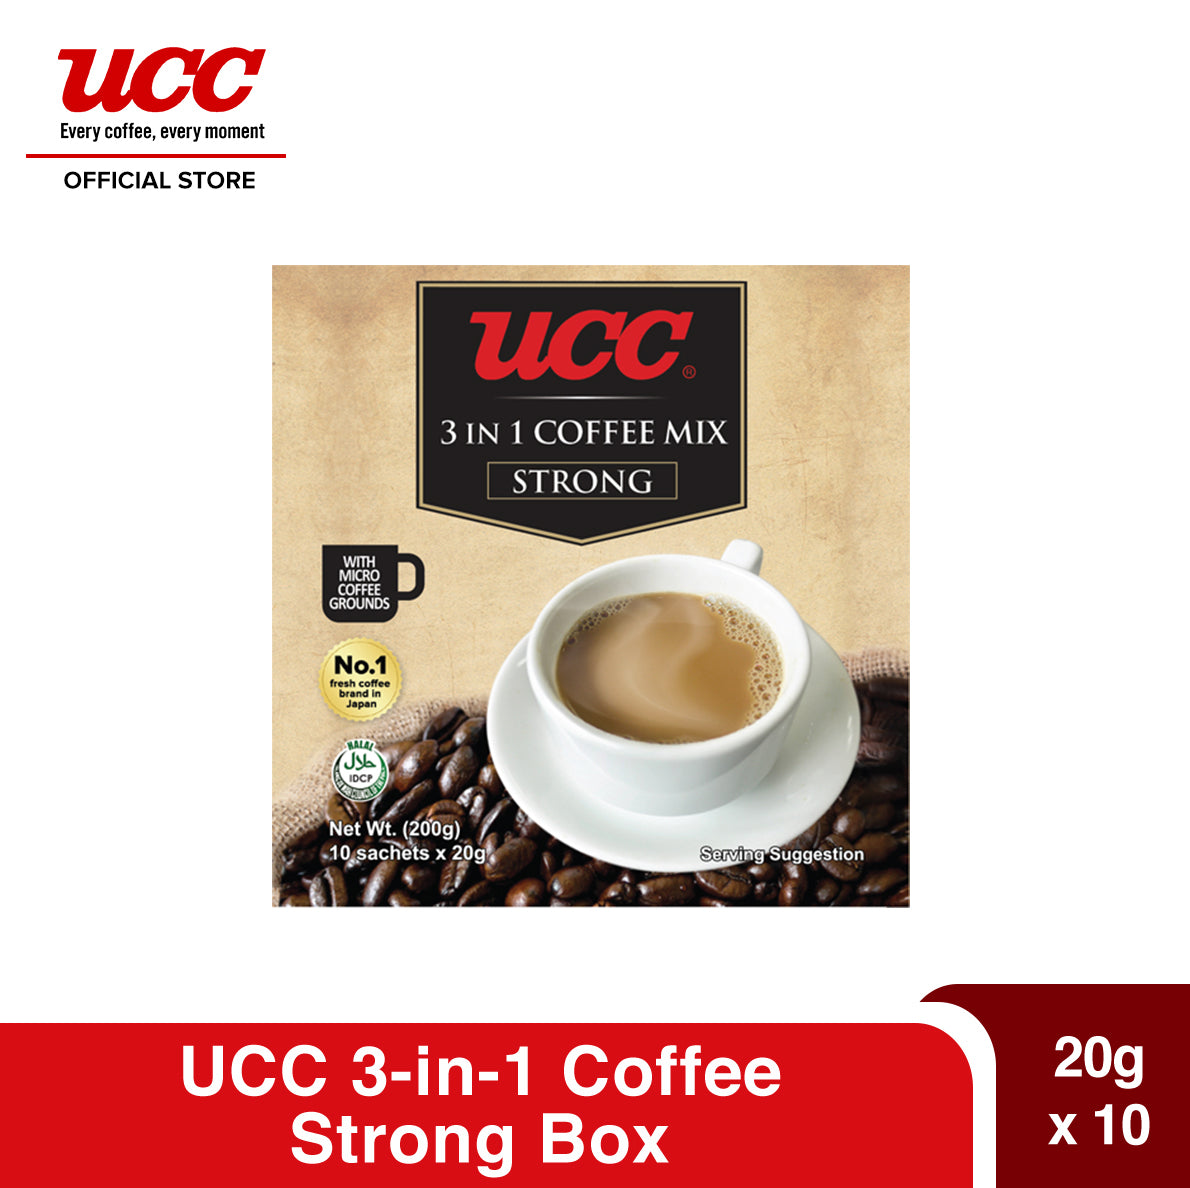 UCC 3-in-1 Coffee Strong Box (20g x 10)